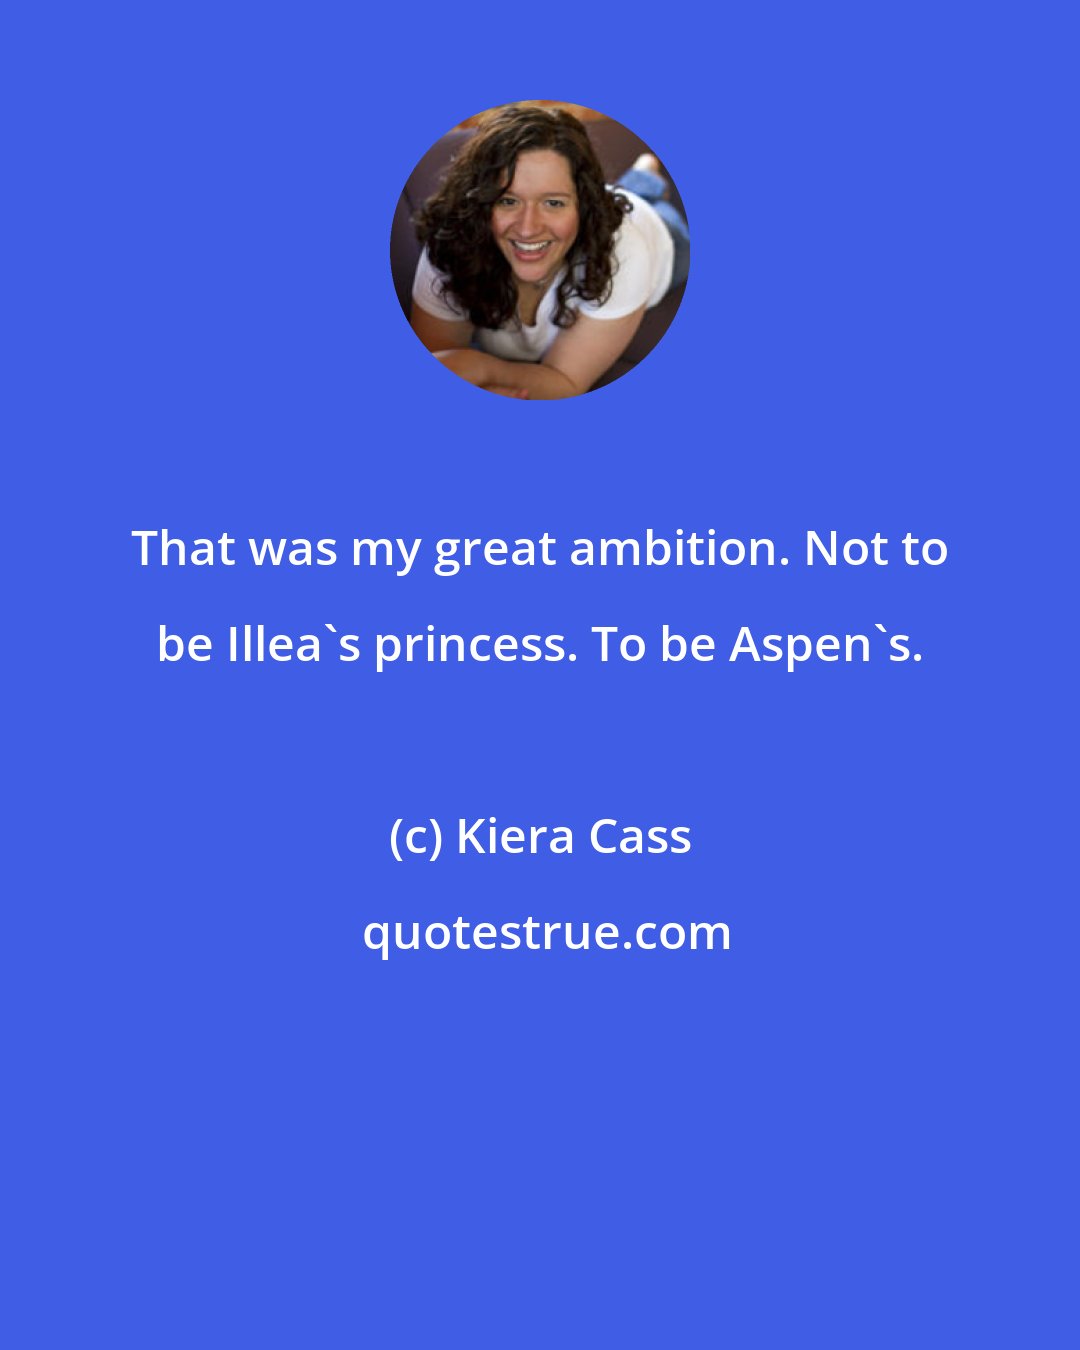 Kiera Cass: That was my great ambition. Not to be Illea's princess. To be Aspen's.